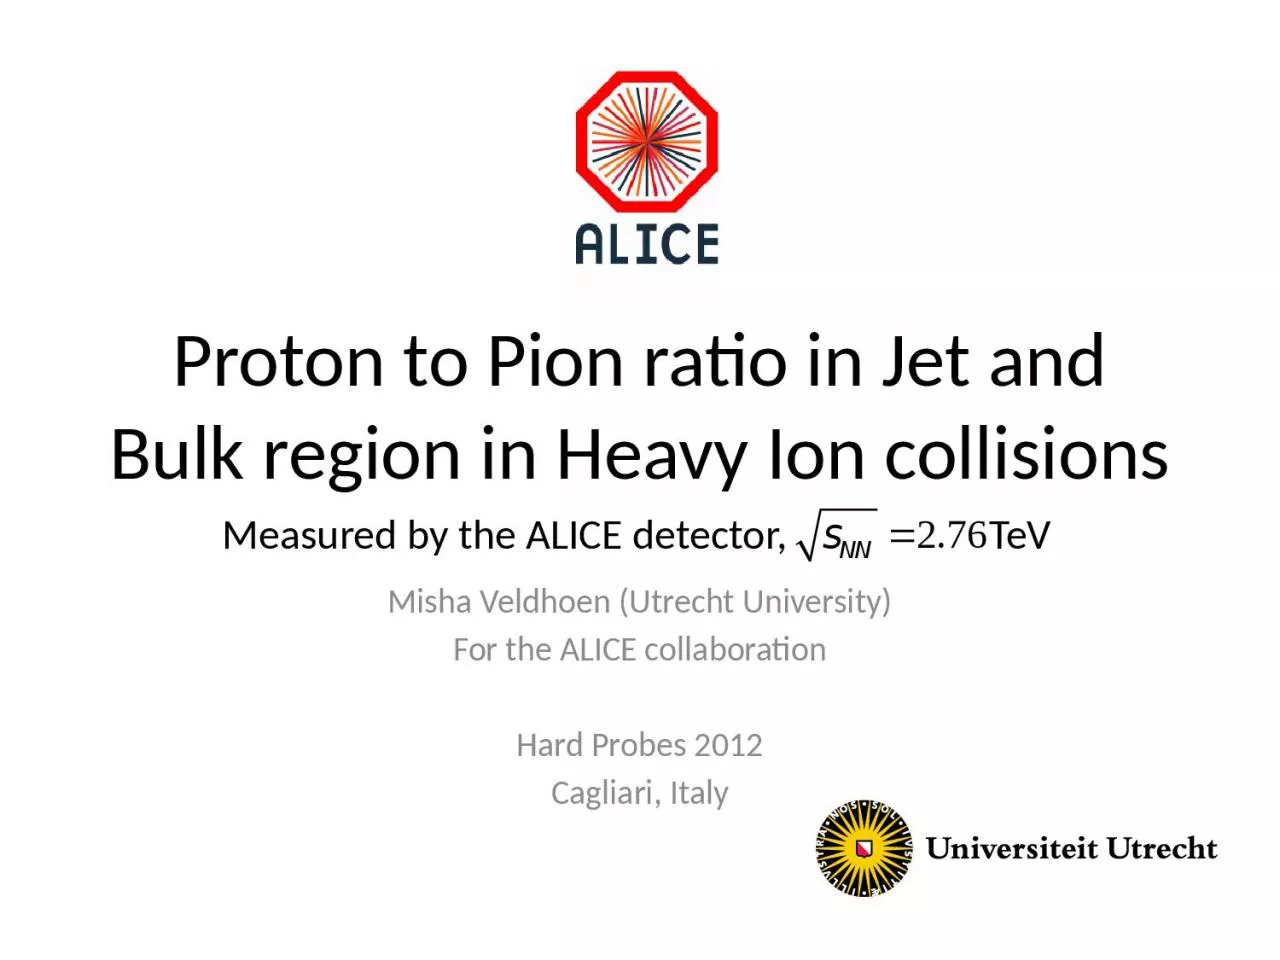 Proton to Pion ratio in Jet and Bulk region in Heavy Ion collisions